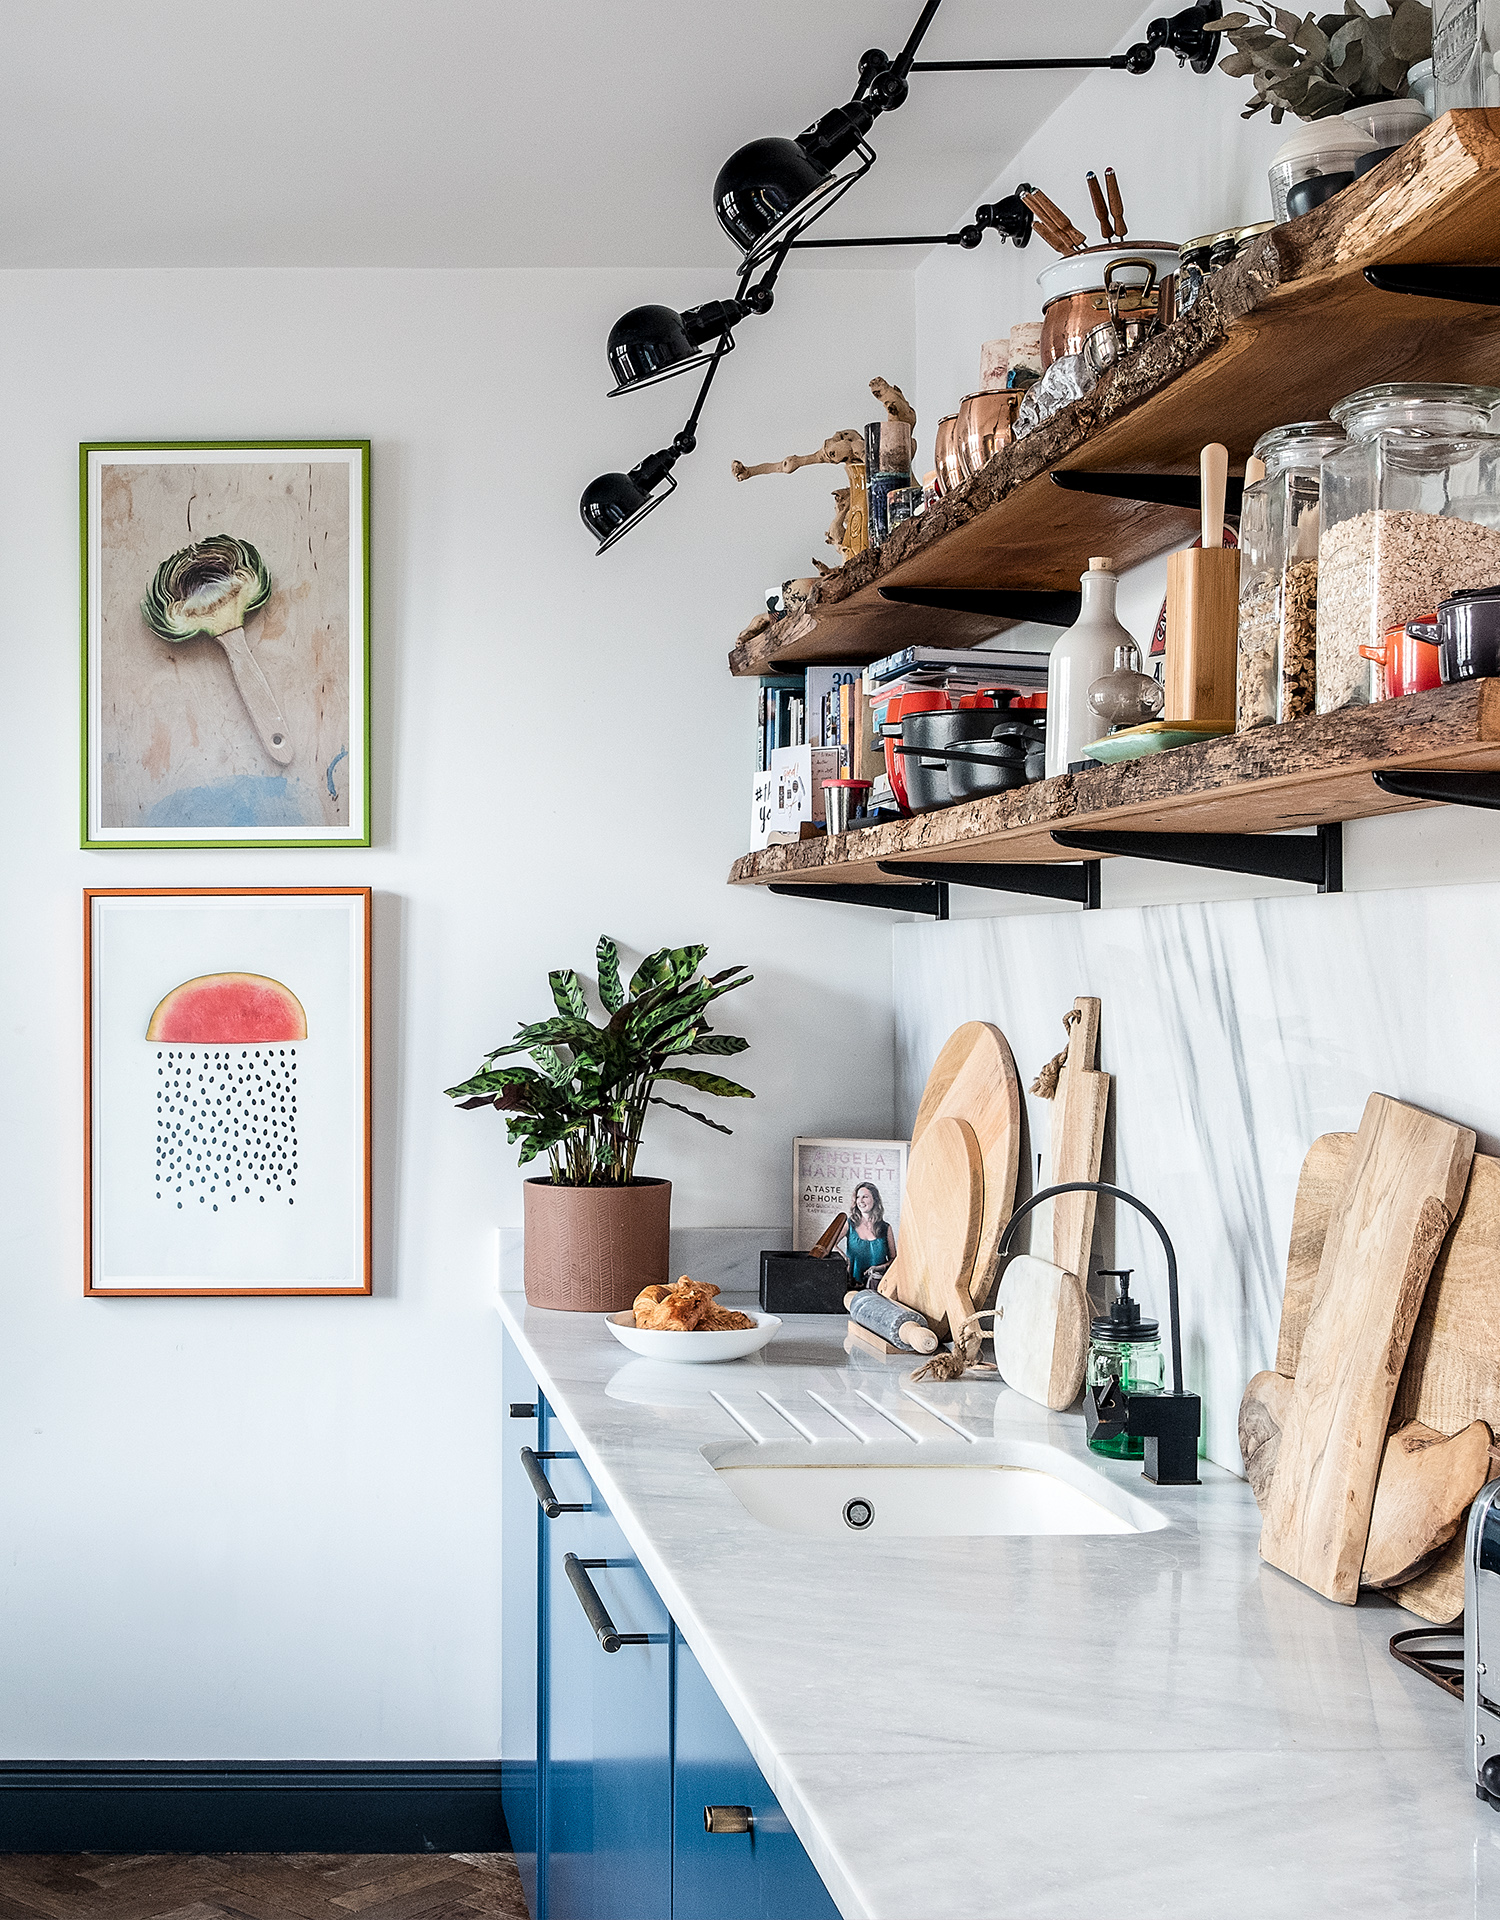 Brixton | Kitchen sideboard and sink | Angel O'Donnell